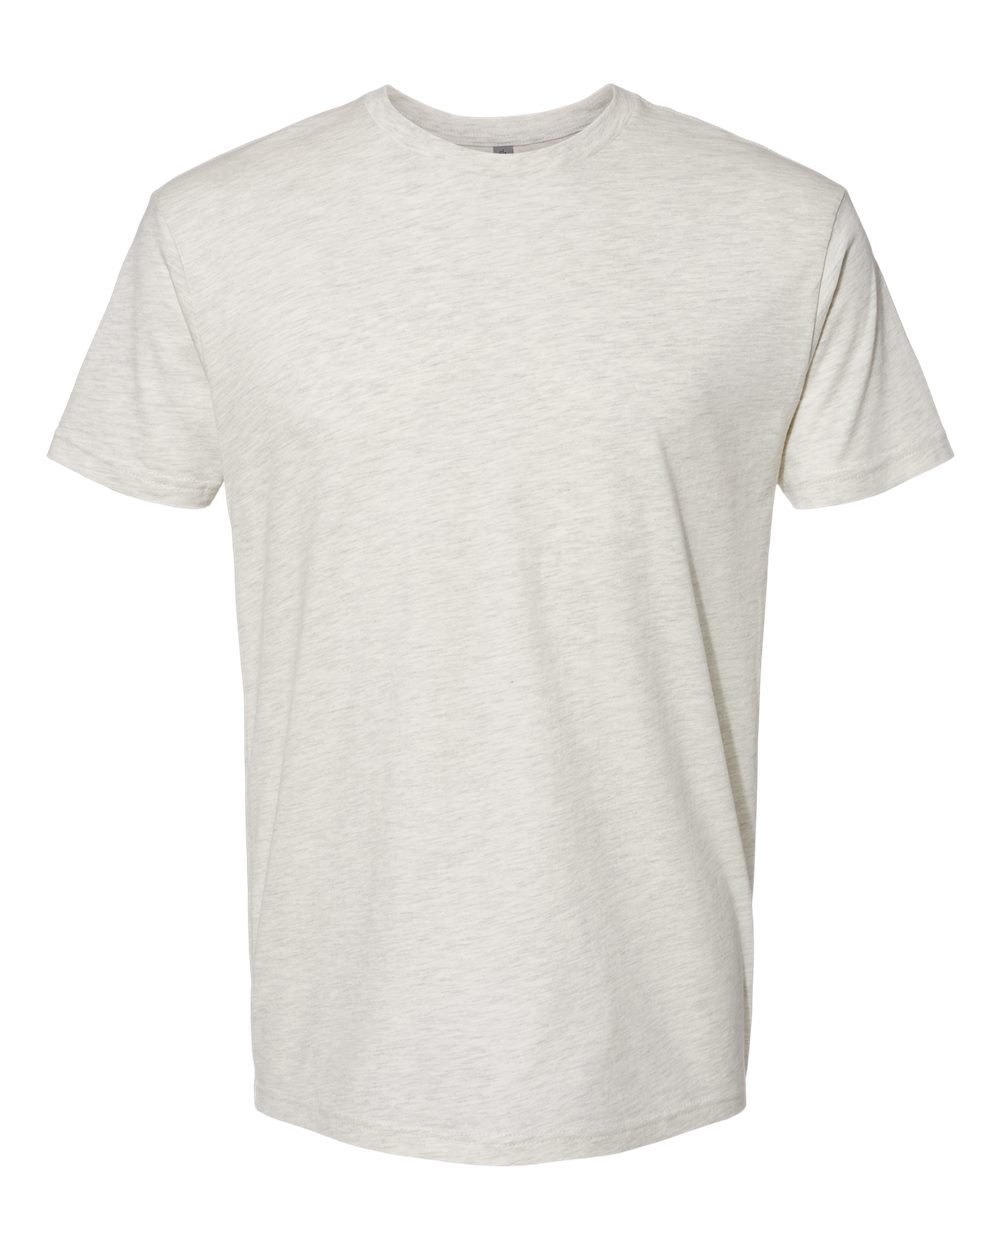 Next Level Cotton Tee (3600) in Oatmeal